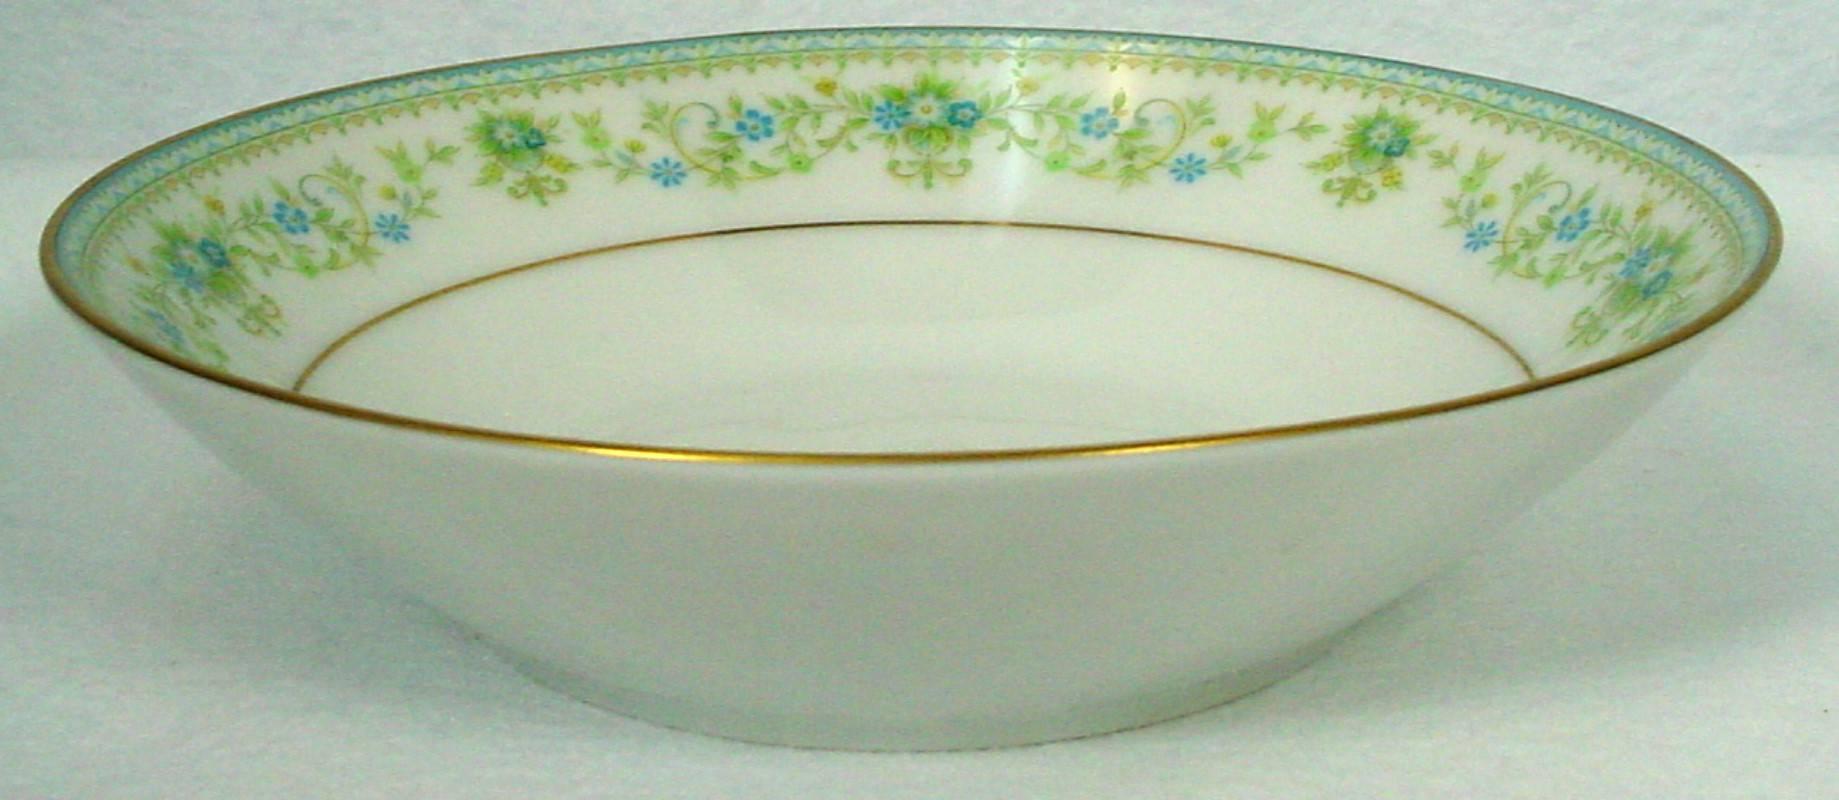 Noritake china Spring Meadow 2484 pattern 60-pc set service for 12

in great condition with minimal use.

• Production Dates: 1973-1984.

• Includes 12 each cup, saucer, dinner plate, salad plate, bread plate, fruit/berry bowl, and soup/salad